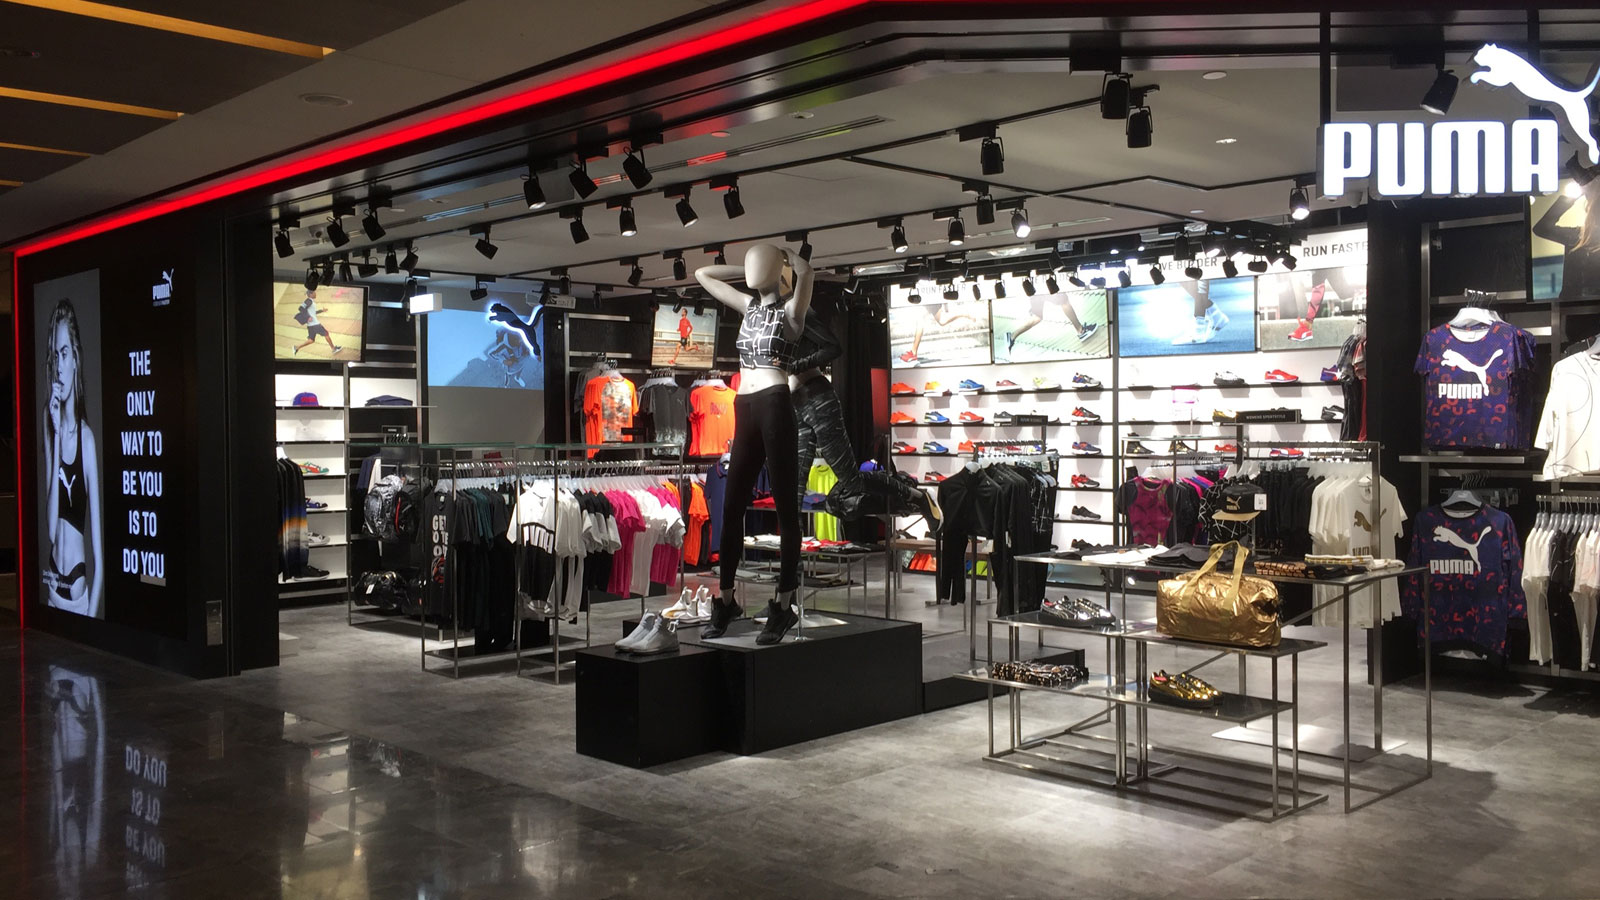 onregelmatig Uitwerpselen sla PUMA Launches Forever Faster 2 Concept Stores in Singapore